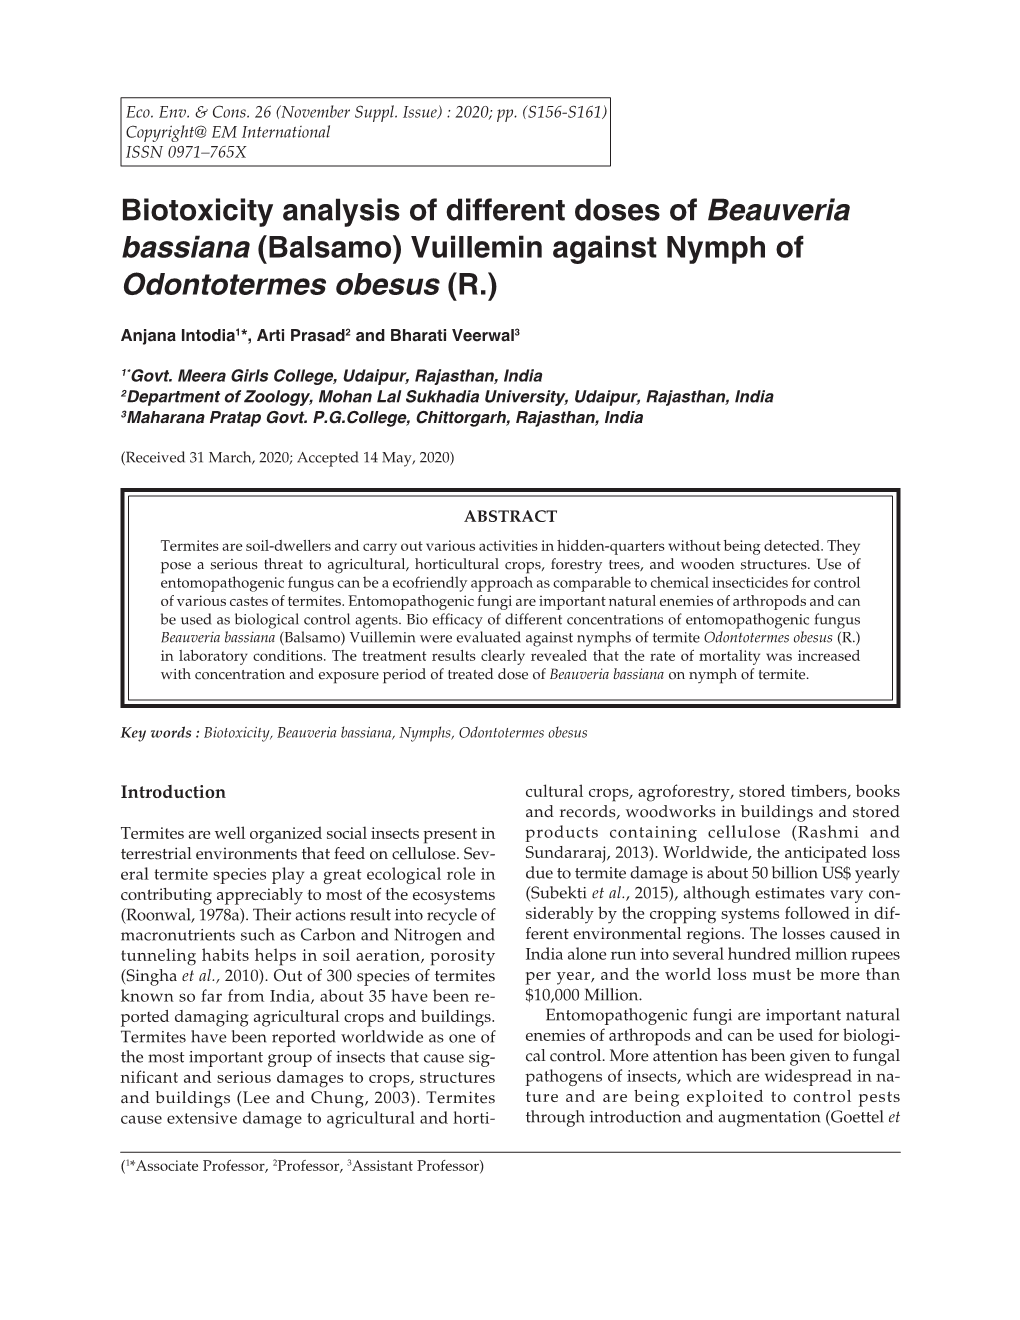 Biotoxicity Analysis of Different Doses of Beauveria Bassiana (Balsamo) Vuillemin Against Nymph of Odontotermes Obesus (R.)